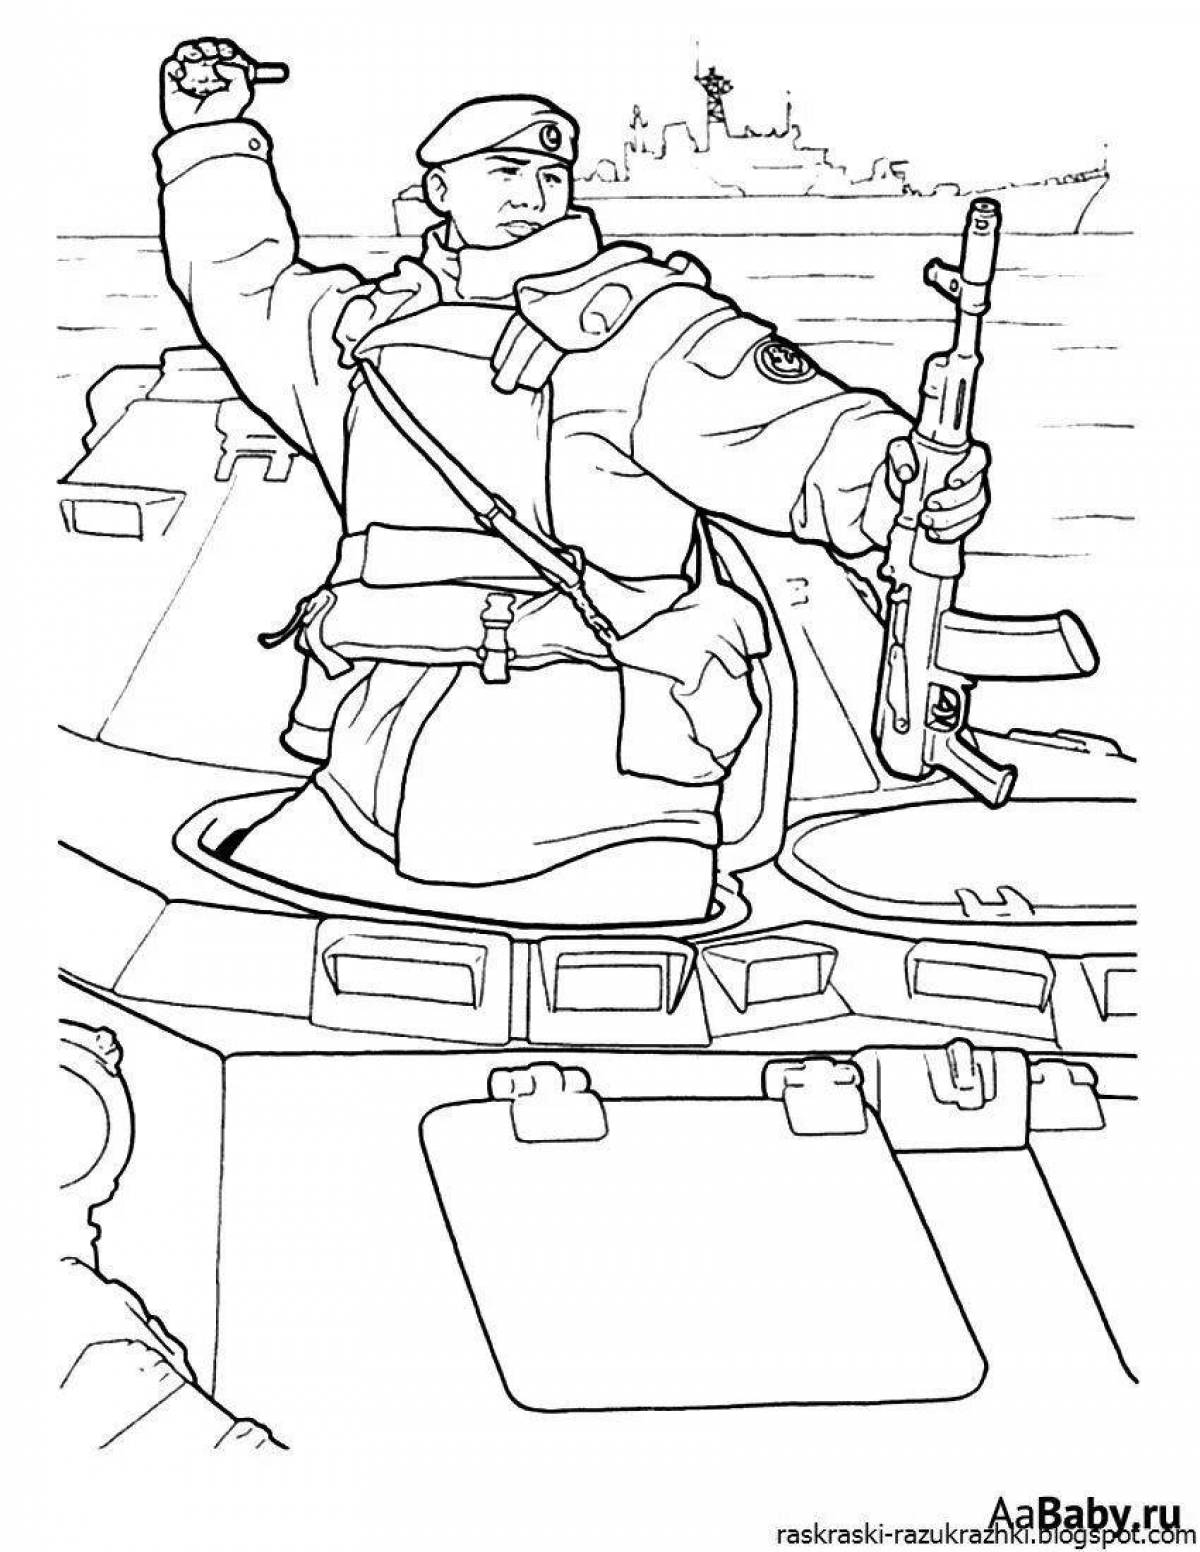 Amazingly majestic Russian soldier coloring book